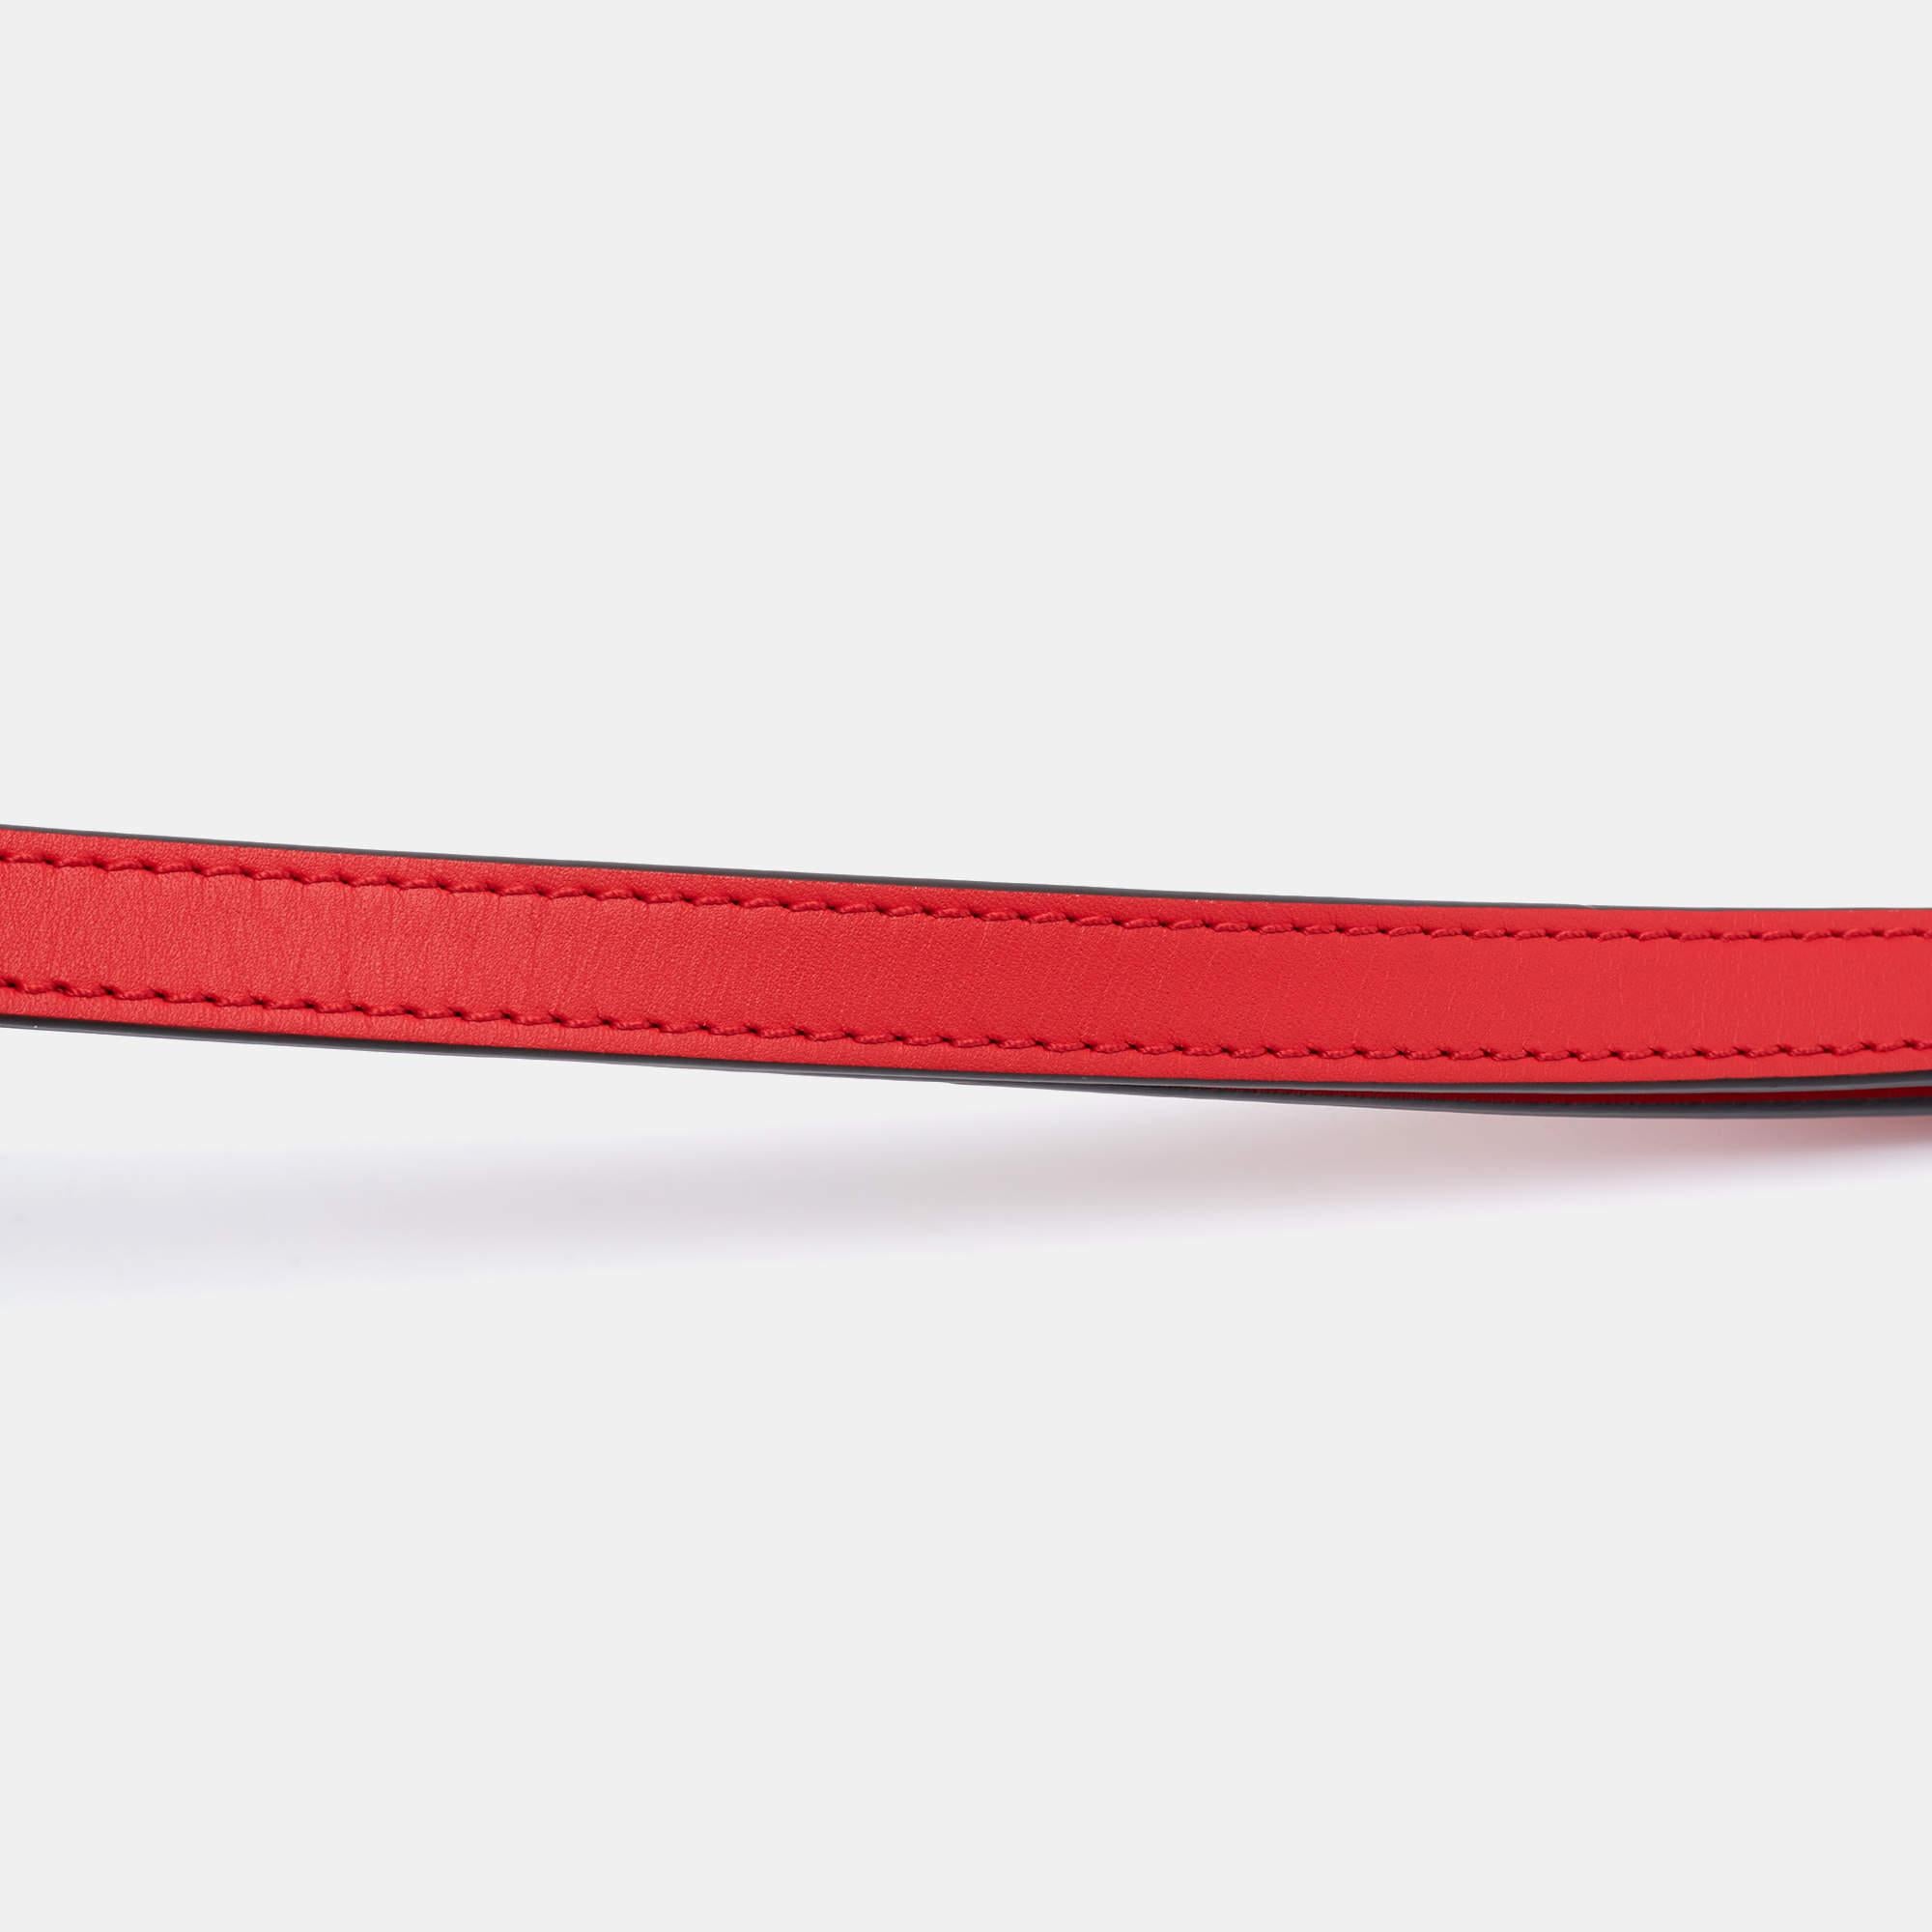 Extending its flawless craftsmanship to accessories, Louis Vuitton brings you this simple and functional shoulder strap. Red in shade and made from leather, this strap is equipped with snap buttons and gold-tone metal clasps, so you can easily